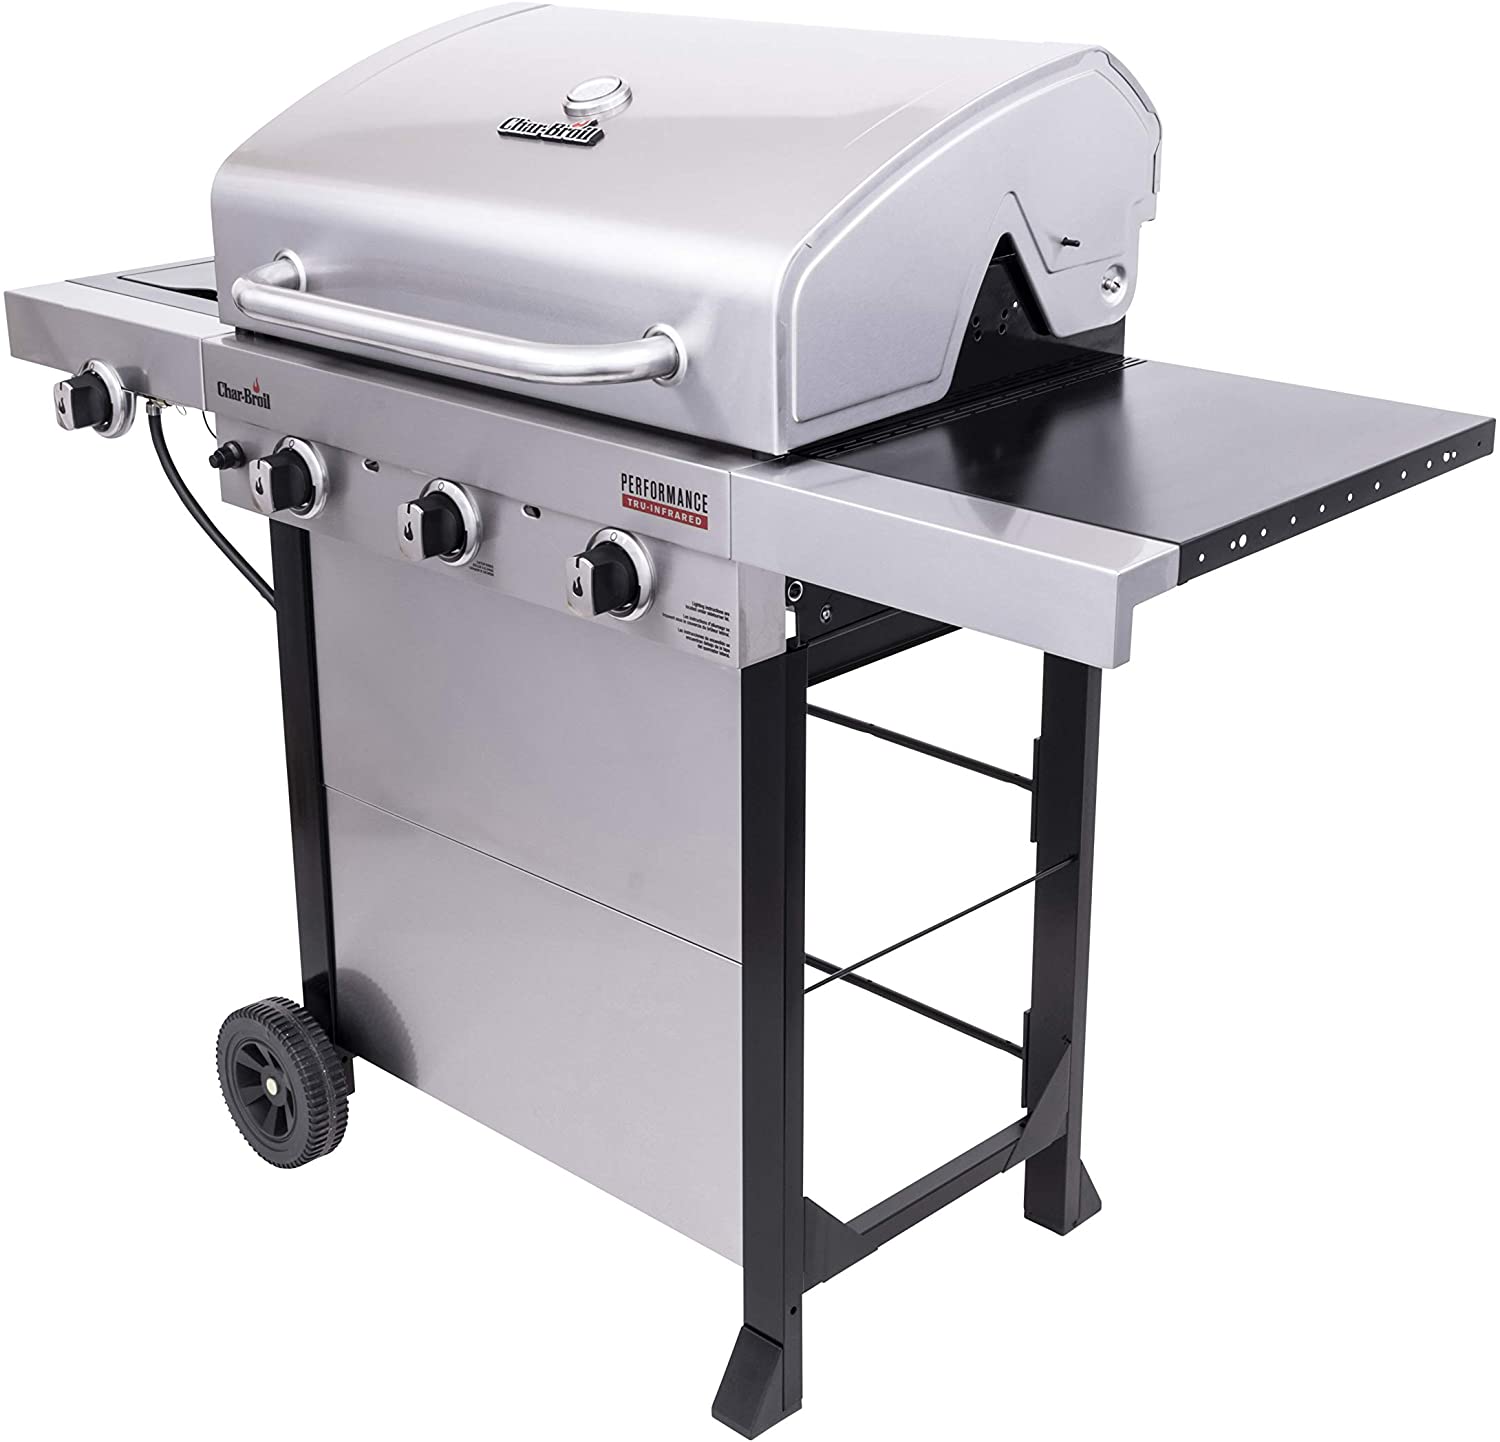 Char-Broil 463370719 Performance TRU-Infrared 3-Burner Cart Style Gas Grill, Stainless Steel - image 3 of 6